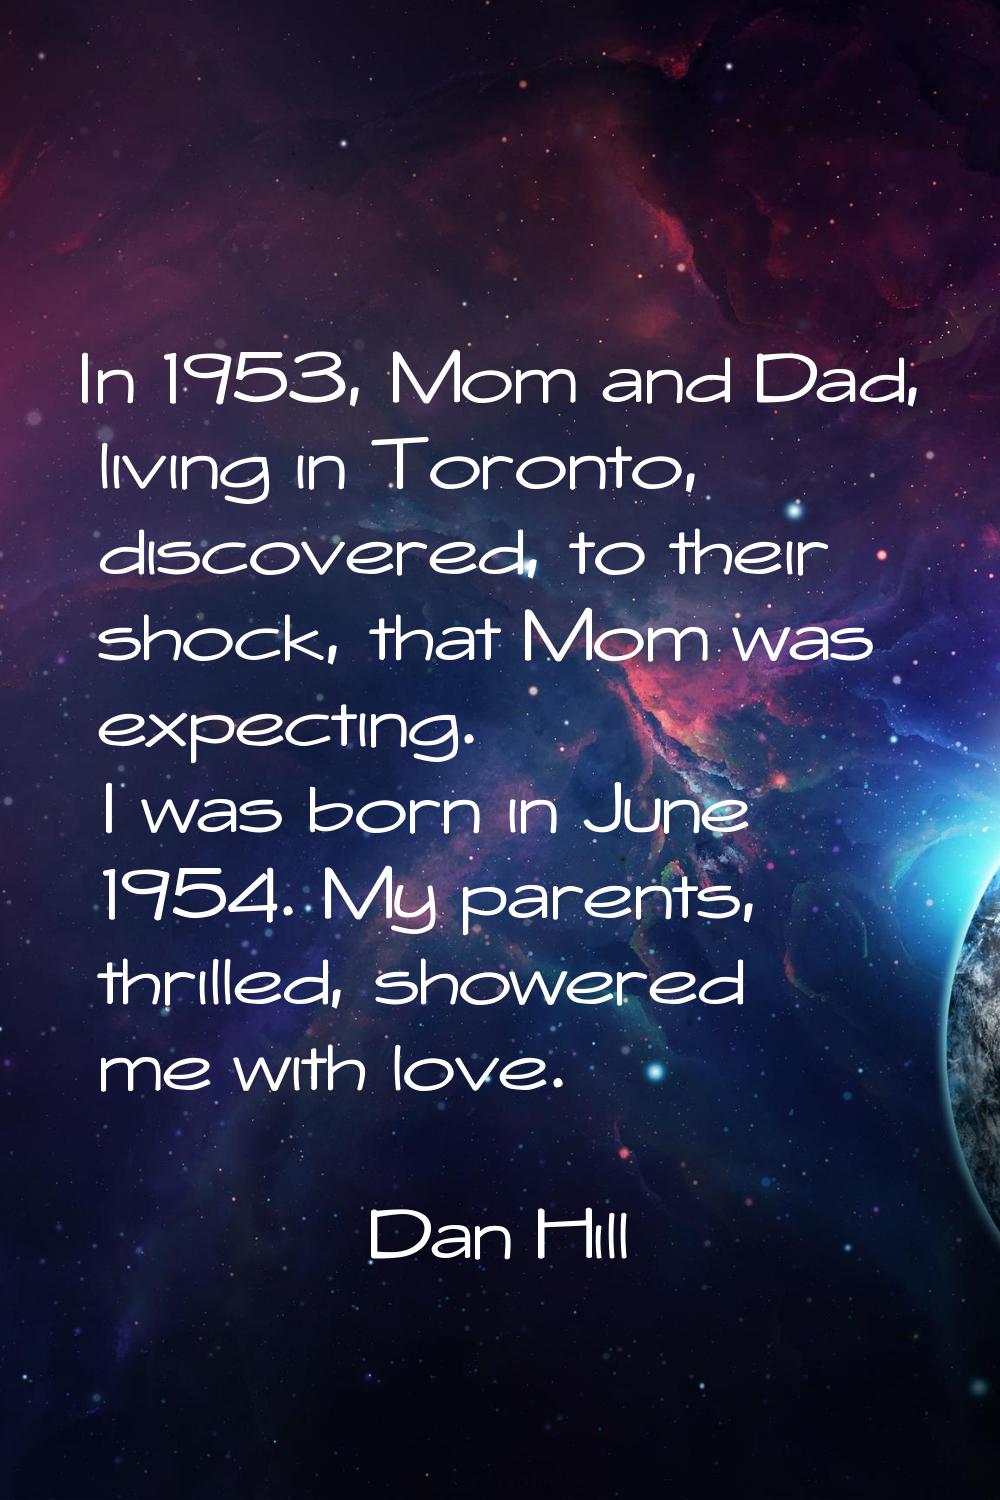 In 1953, Mom and Dad, living in Toronto, discovered, to their shock, that Mom was expecting. I was 